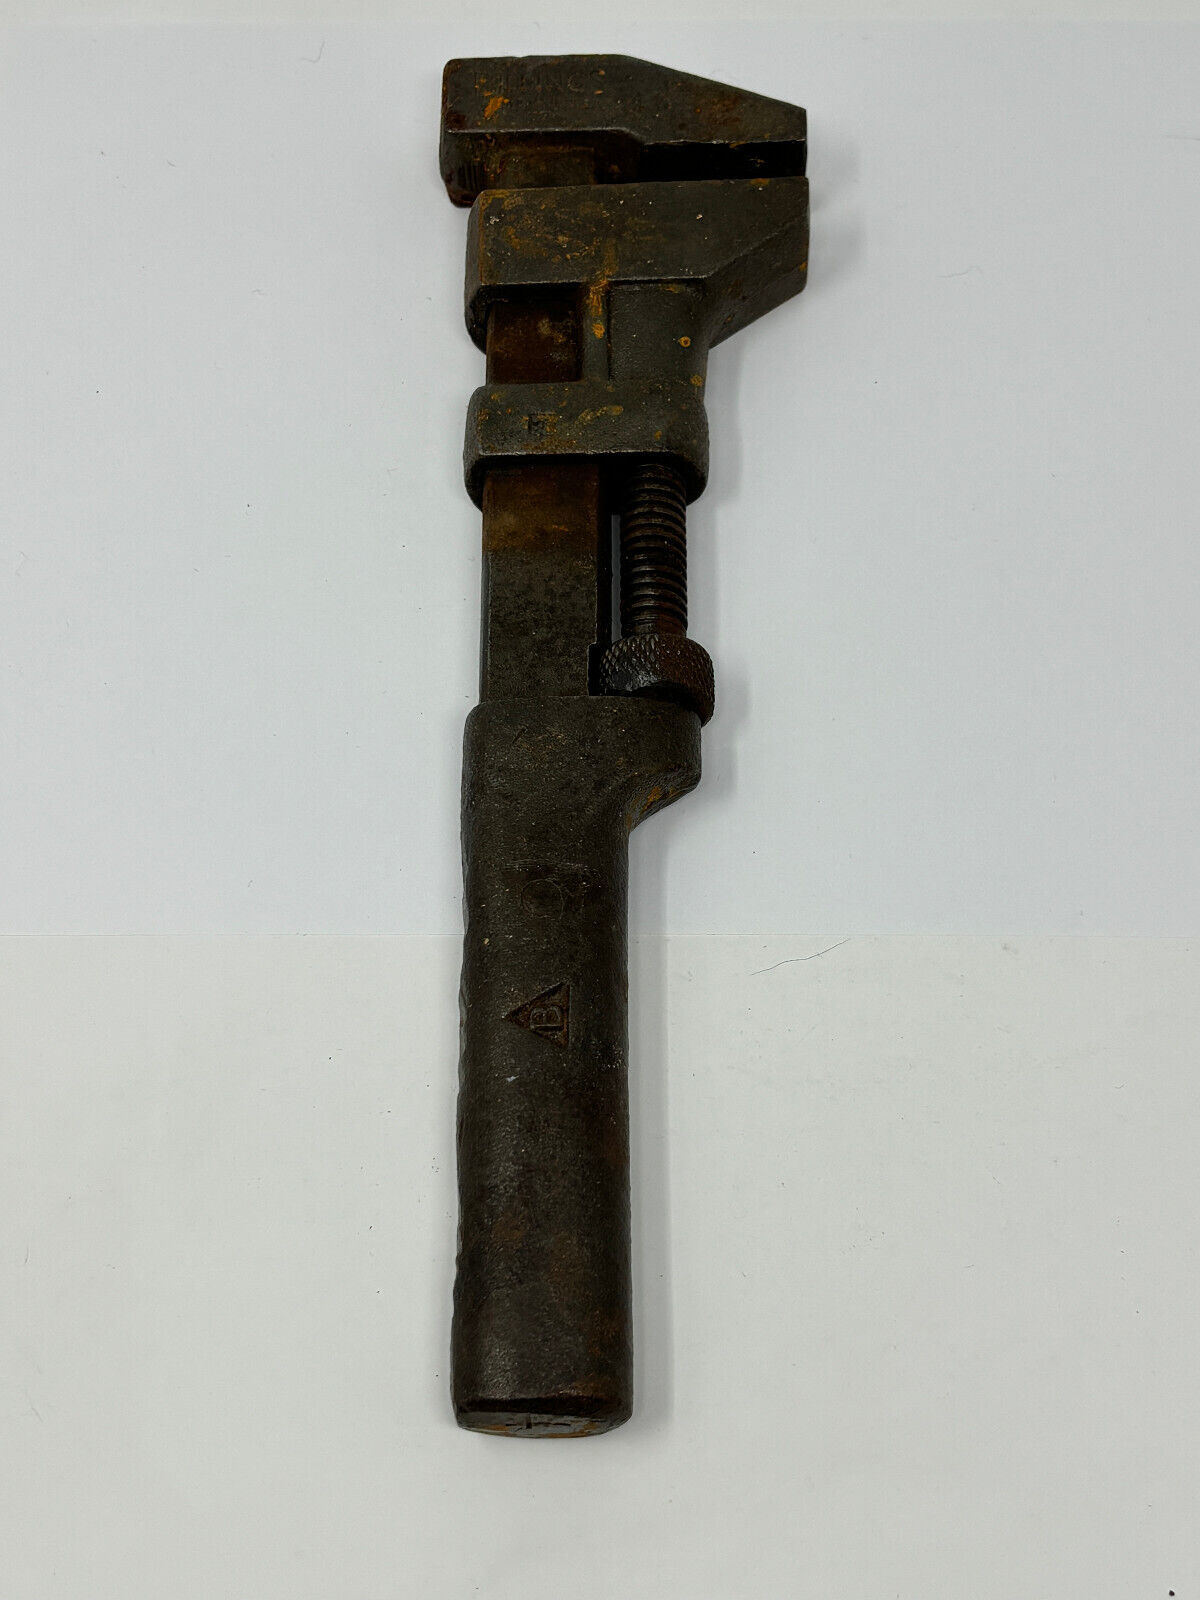 Vintage Billings Adjustable Wrench Made in the USA